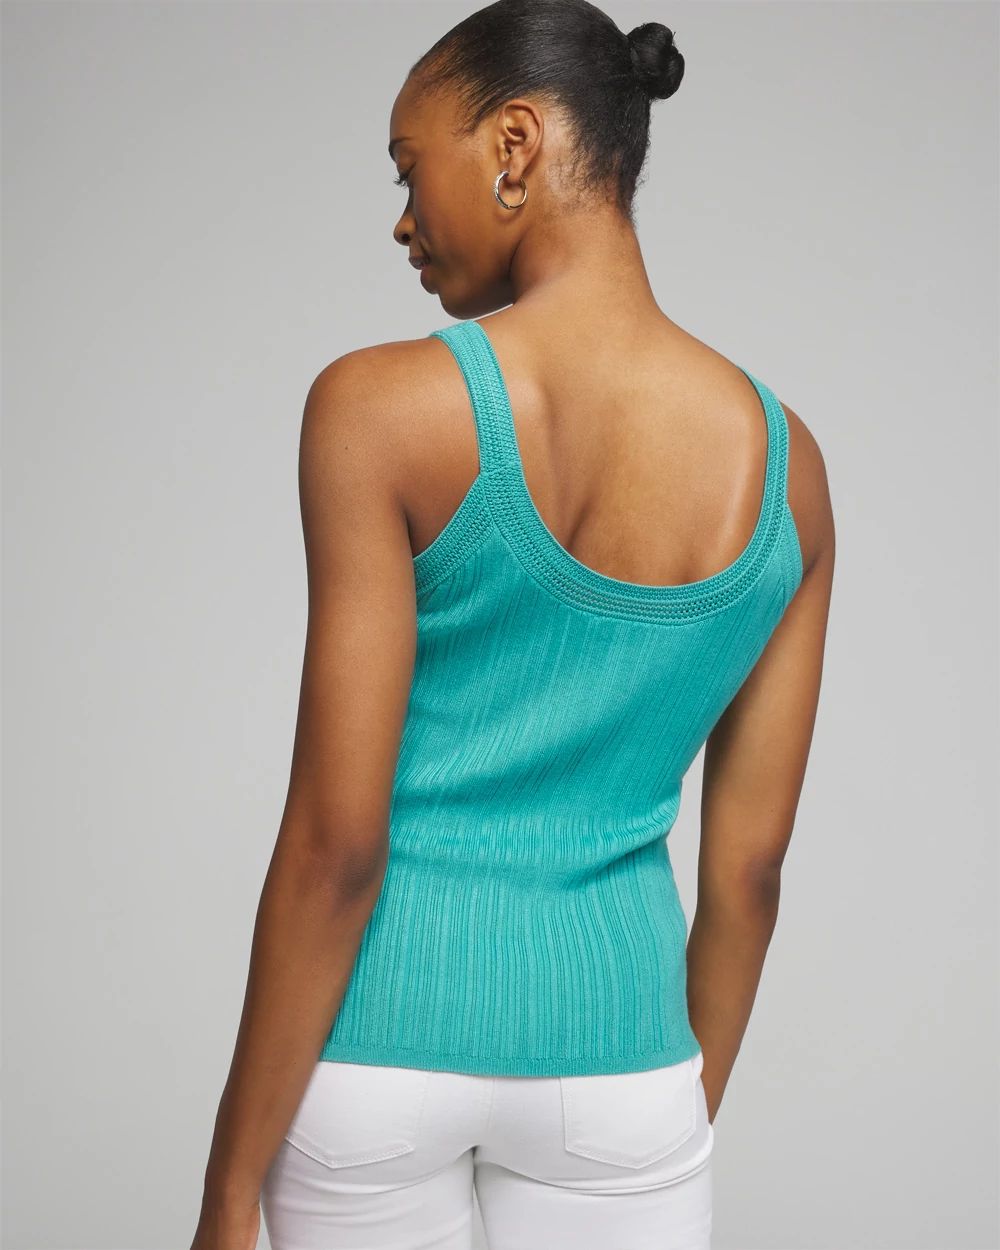 Outlet WHBM Sleeveless Linear Stitch Tank click to view larger image.